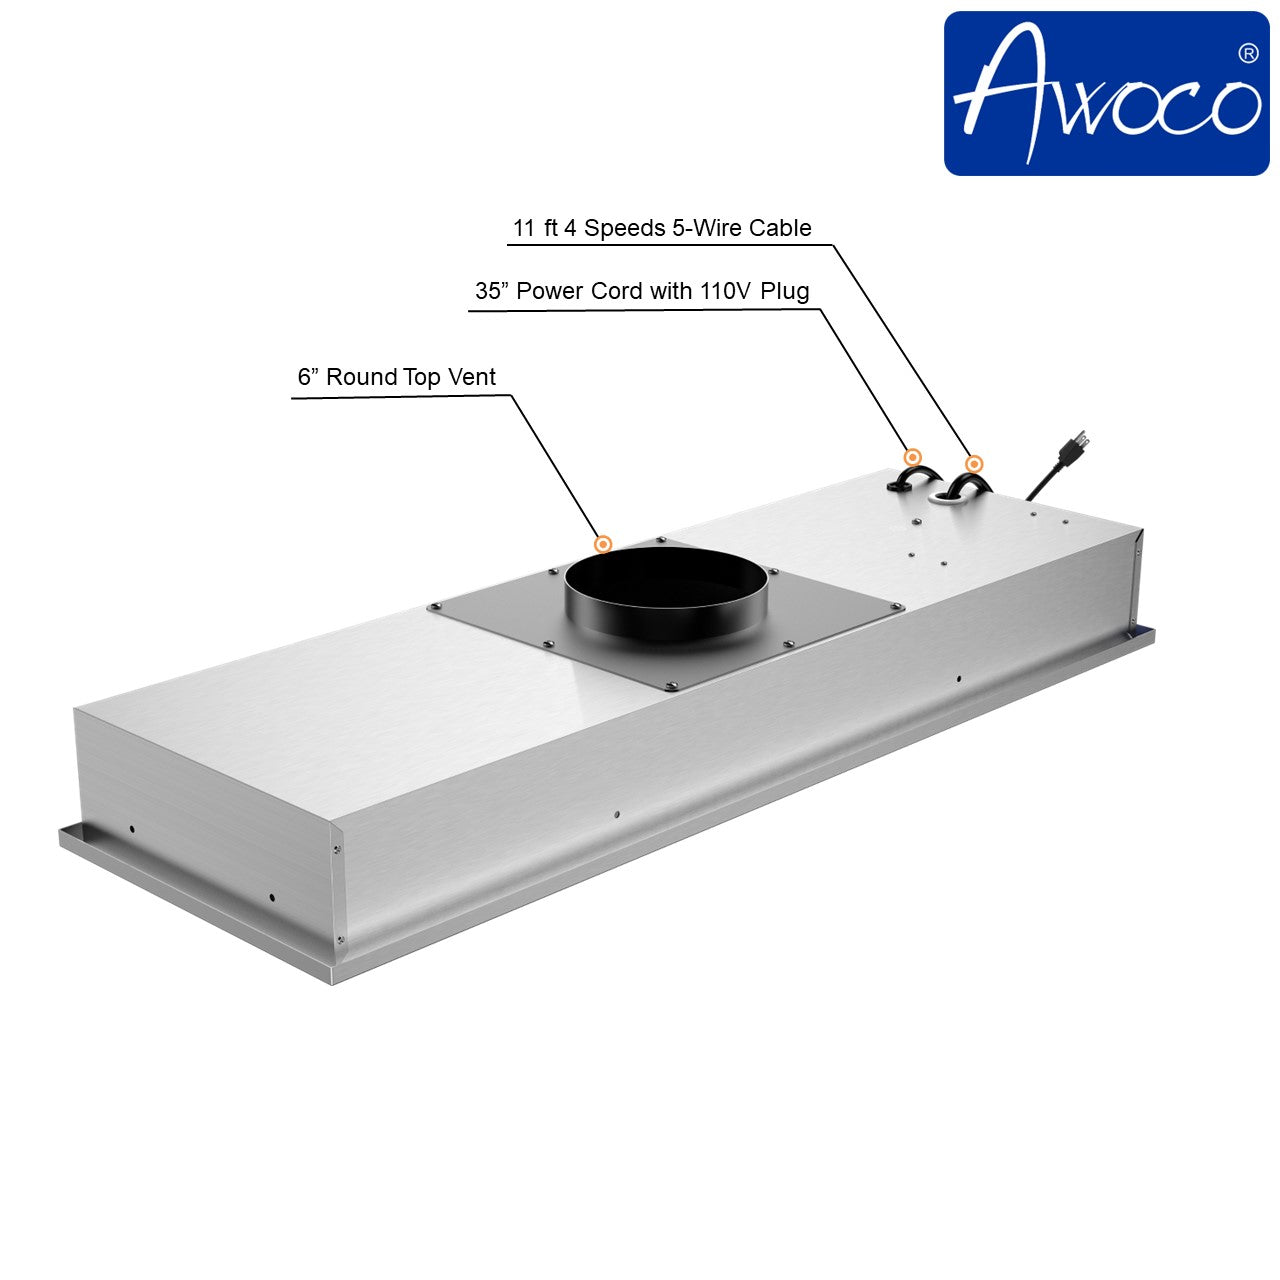 Awoco RH-IT06-R36 14-1/2”D Super Quiet Split Insert Ceiling Mount Stainless Steel Range Hood, 4-Speed, 800 CFM, LED Lights with 6” Blower & Remote Control (36"W 6" Vent)